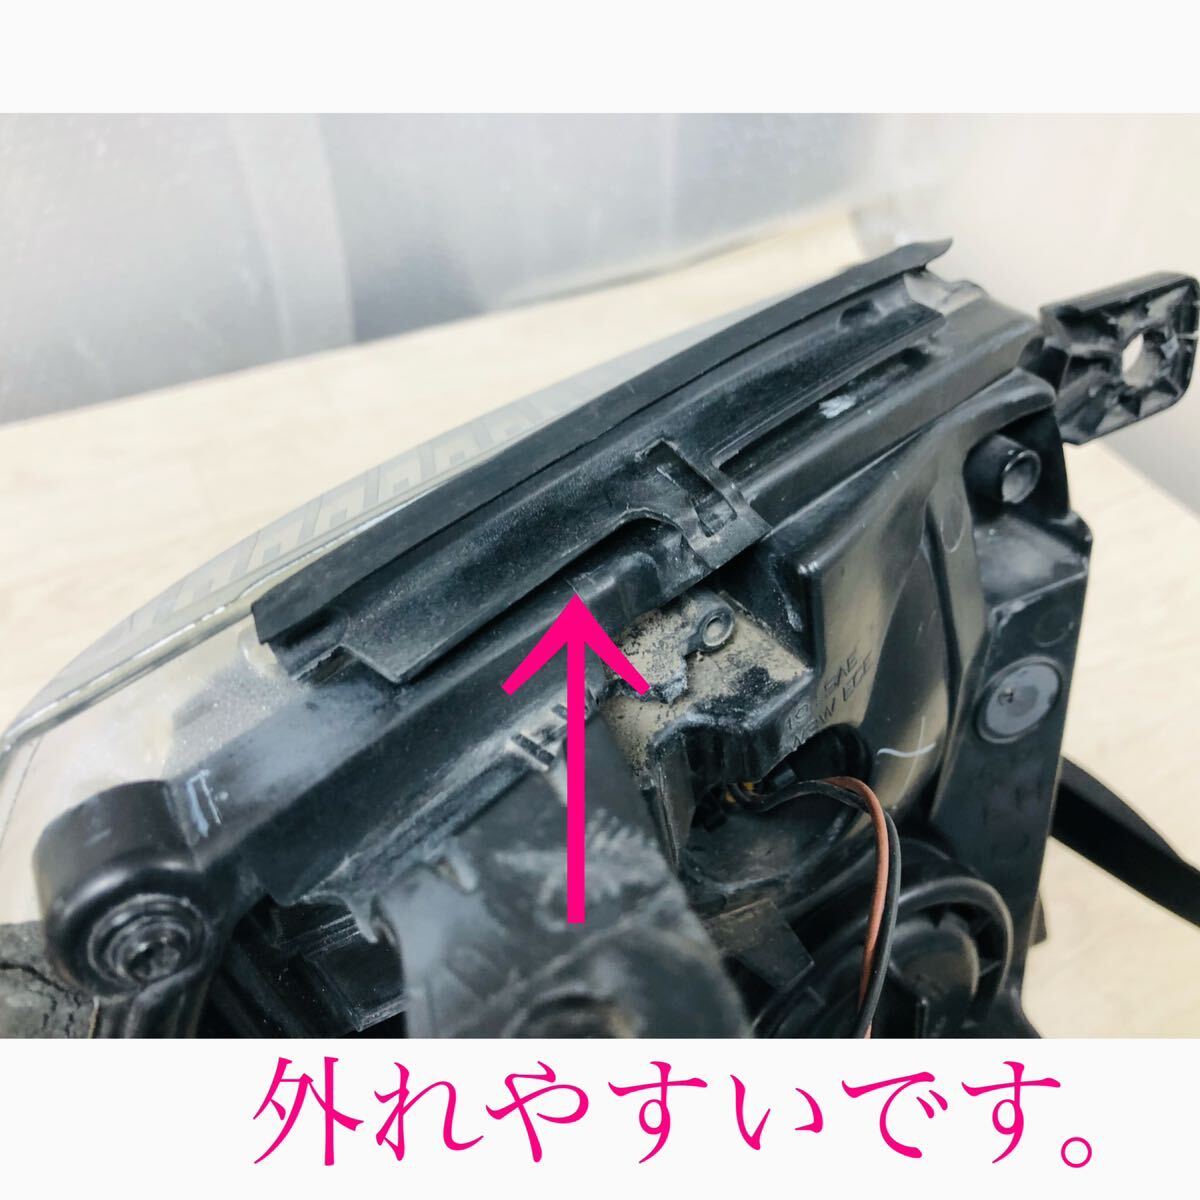  attaching part damage less right side through line overseas specification GM original 07-09y Cadillac Escalade HID xenon head light left left side control 2401253